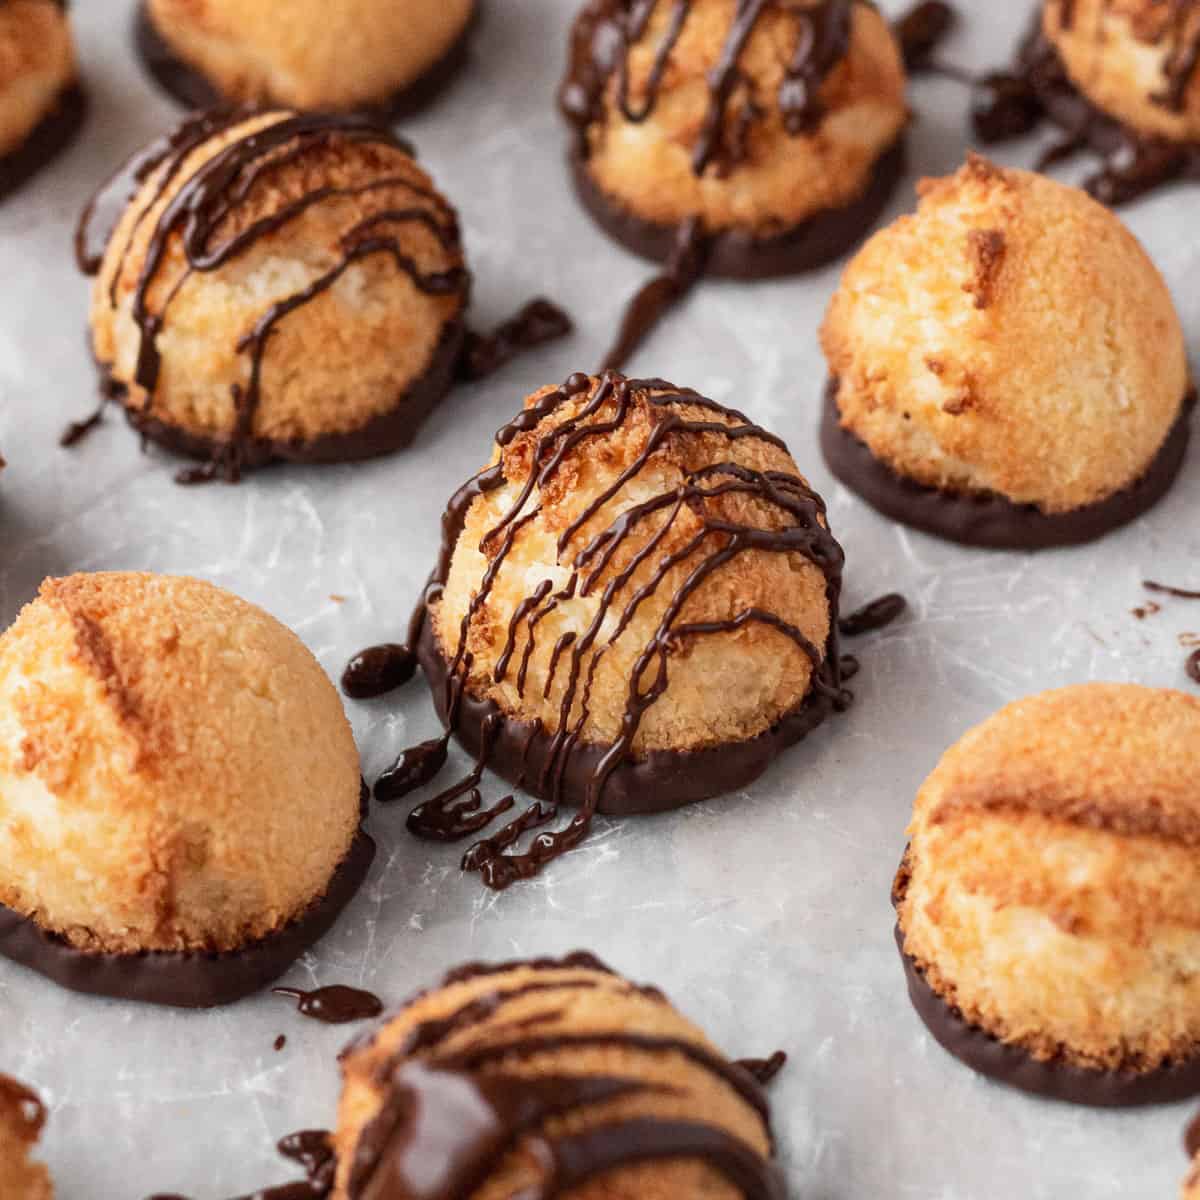 Plain and chocolate drizzled vegan coconut macaroons on a white surface.